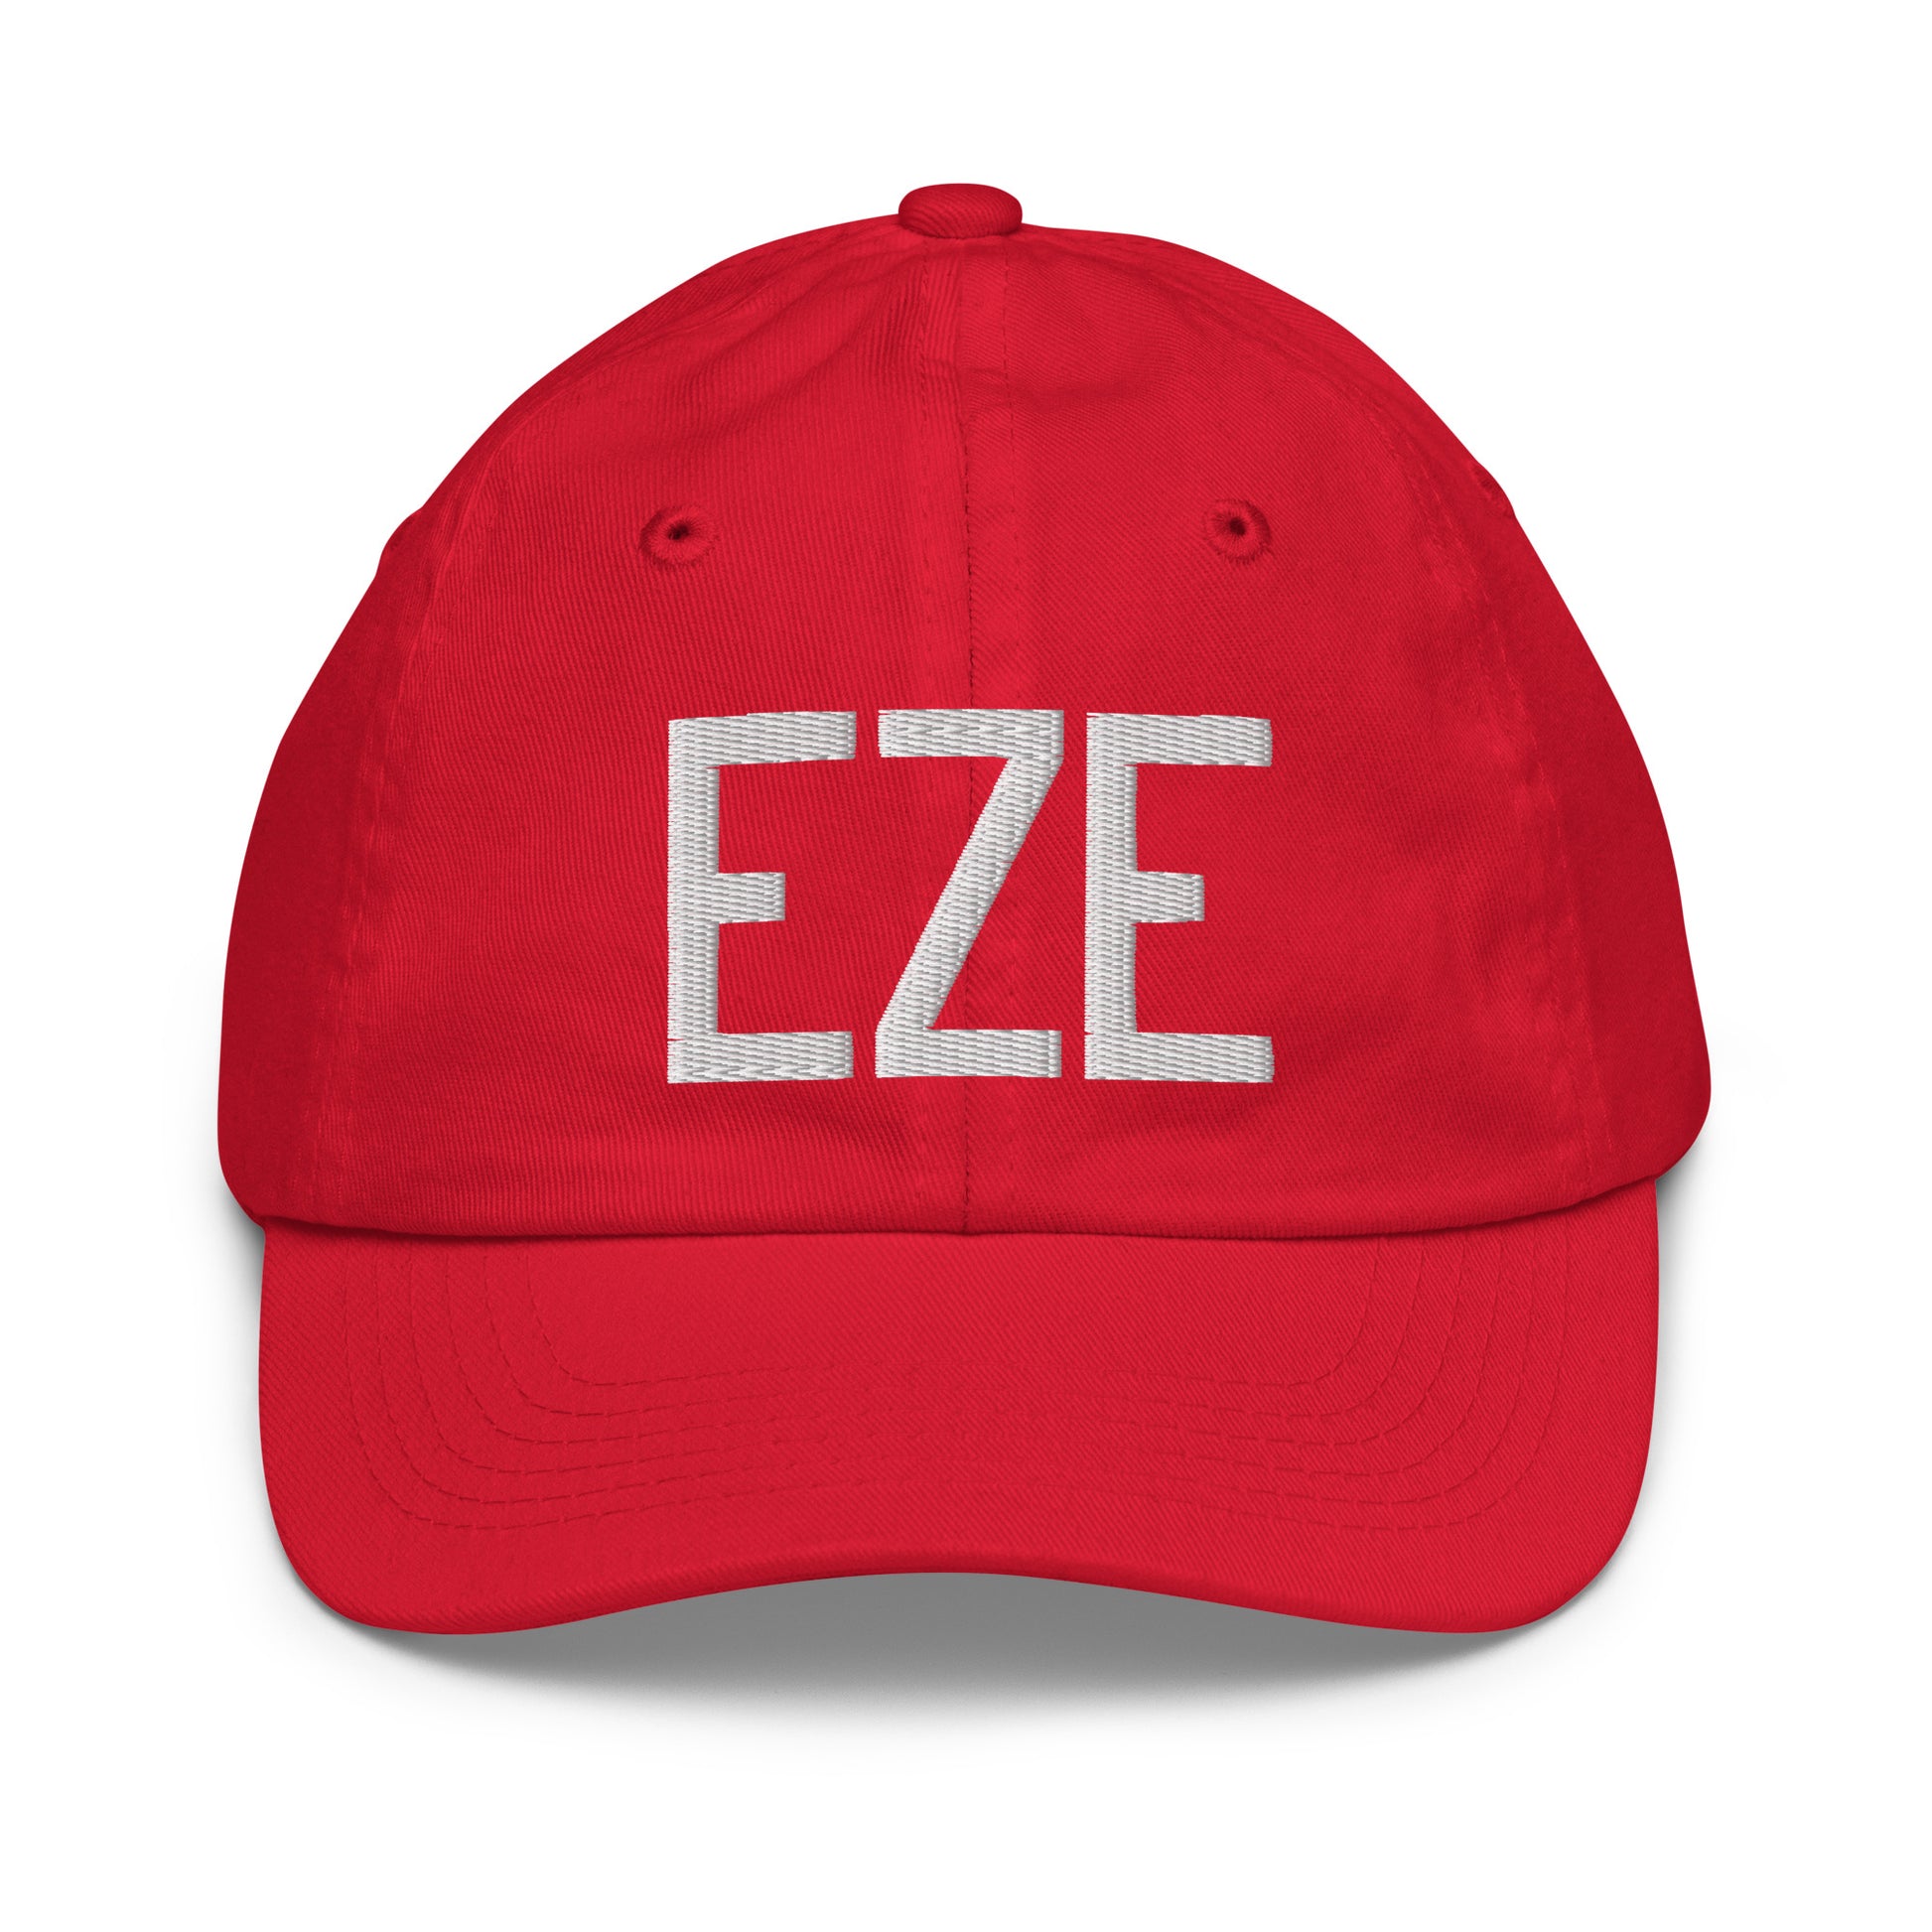 Airport Code Kid's Baseball Cap - White • EZE Buenos Aires • YHM Designs - Image 17